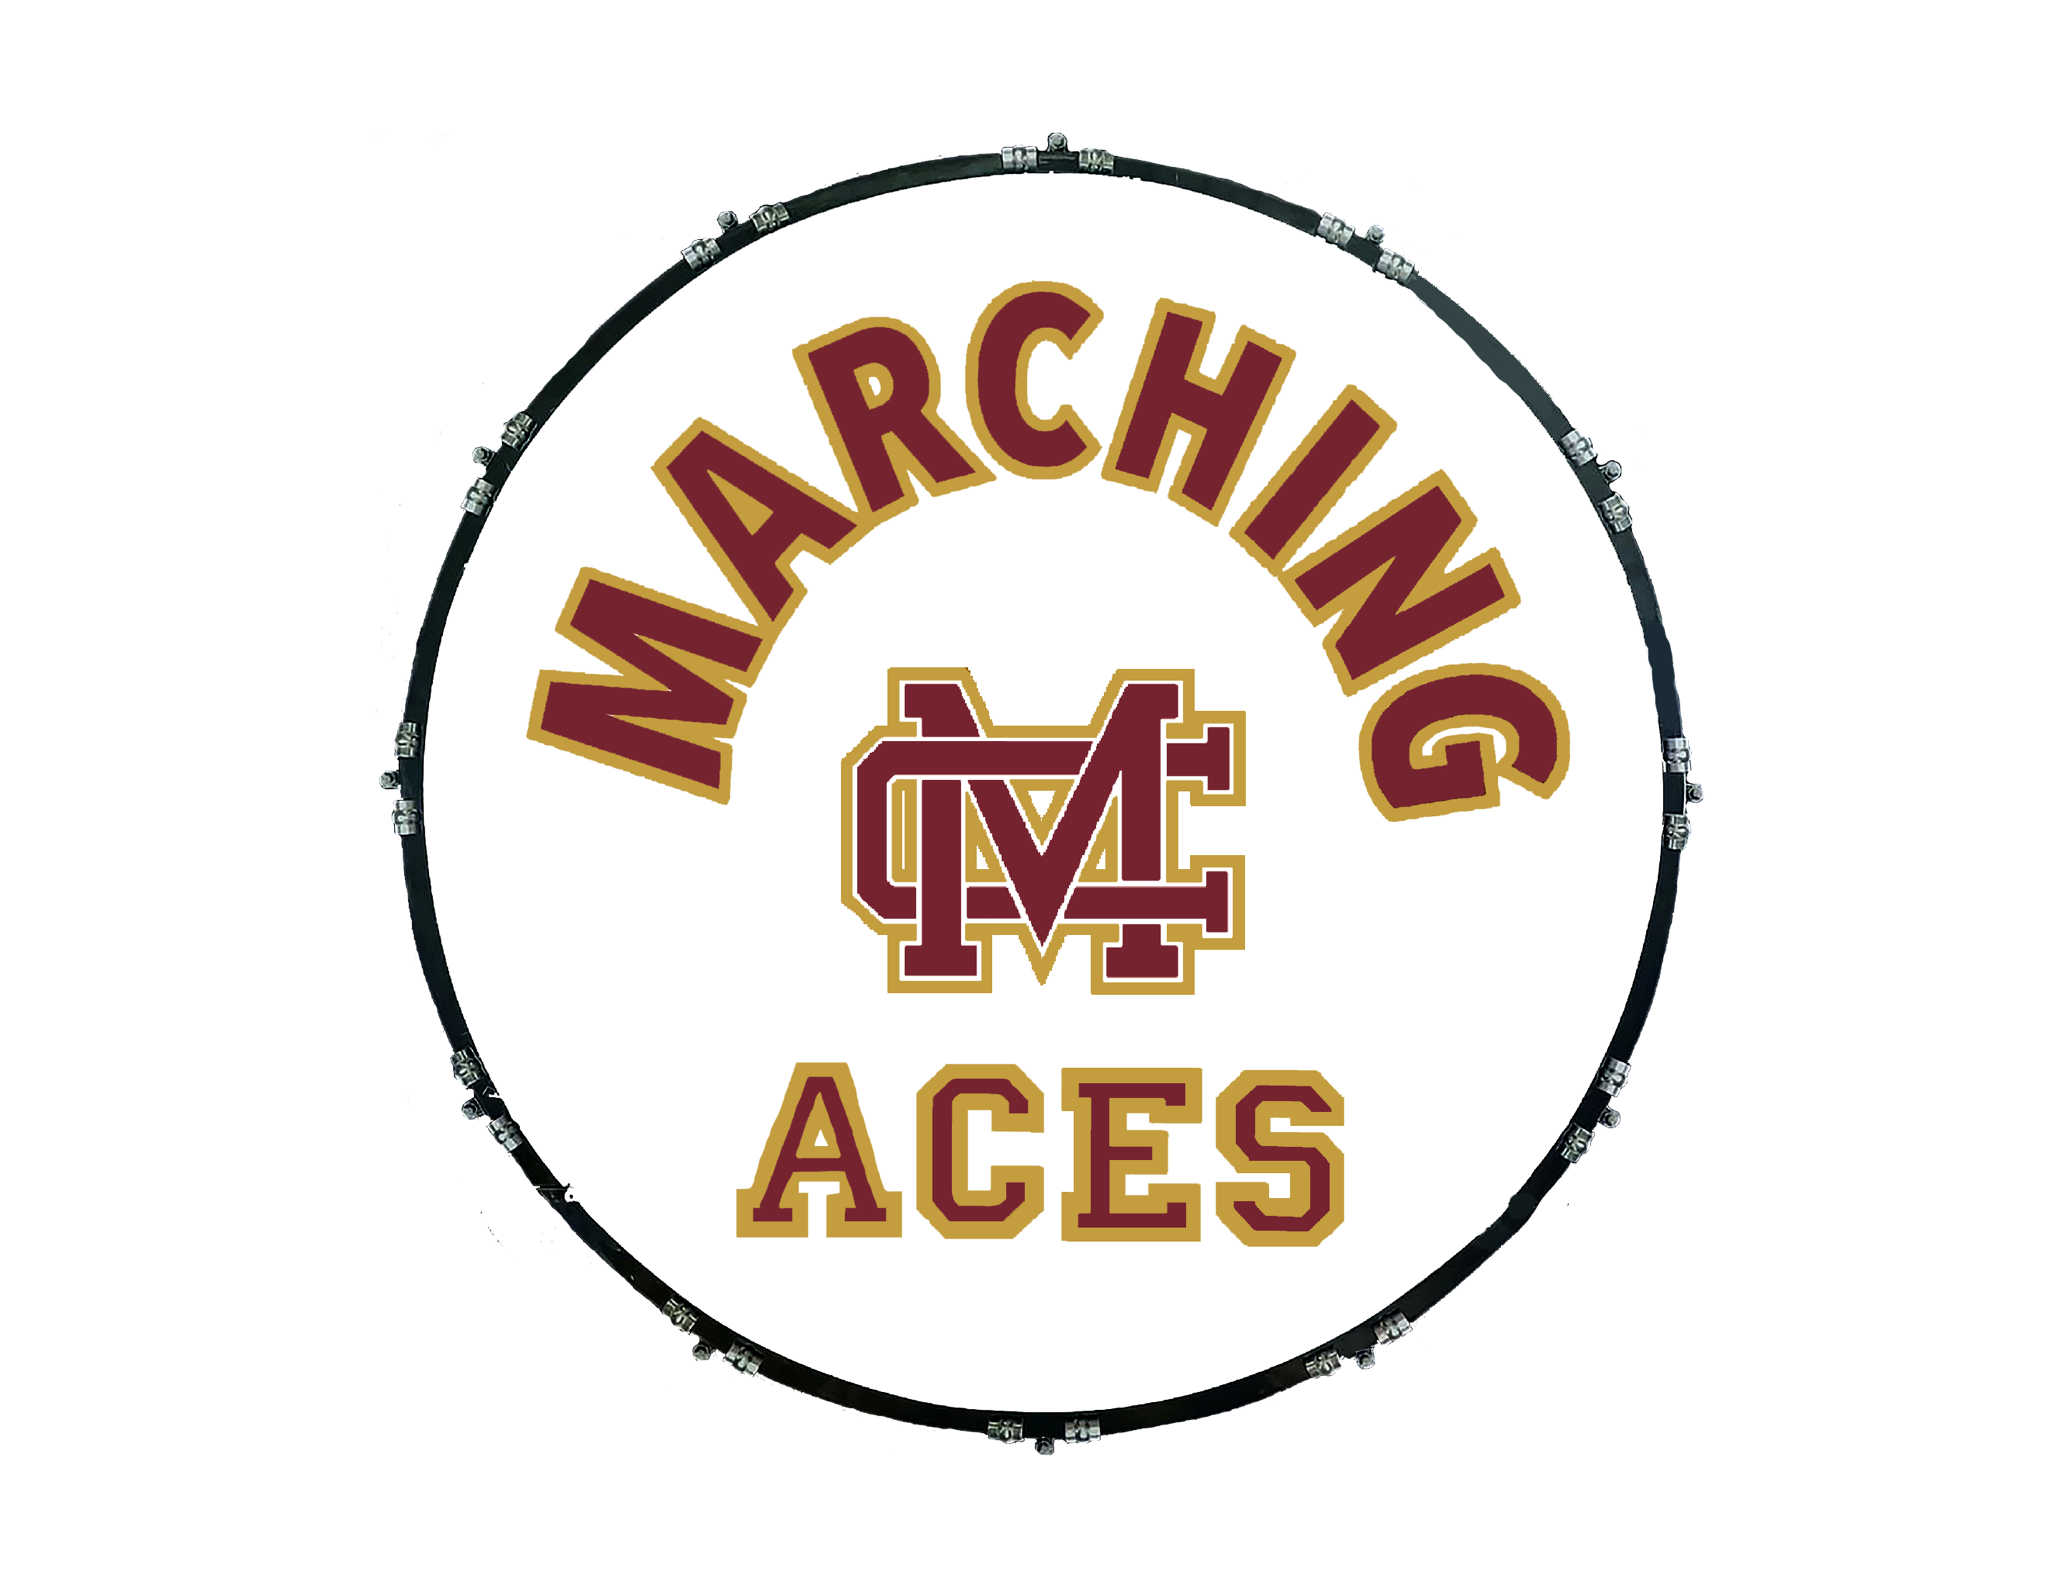 marching aces logo